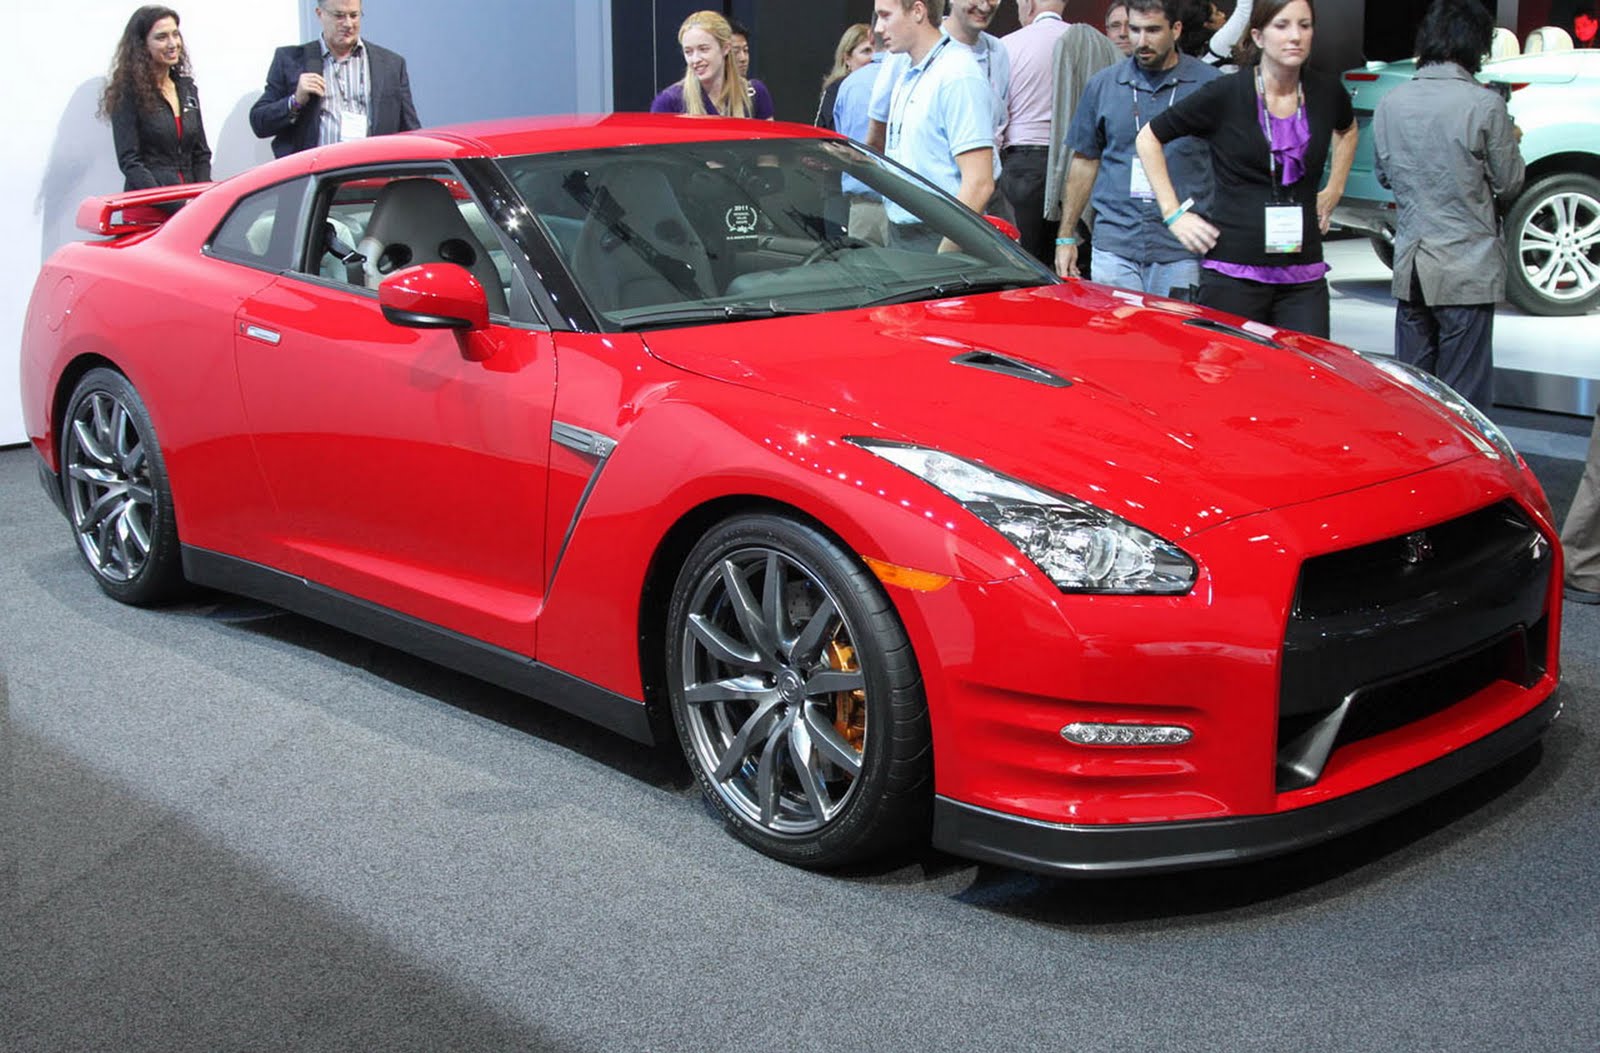 Nissan  20212 on 2012 Nissan Gt R Specifications And Features With Price Details   Car